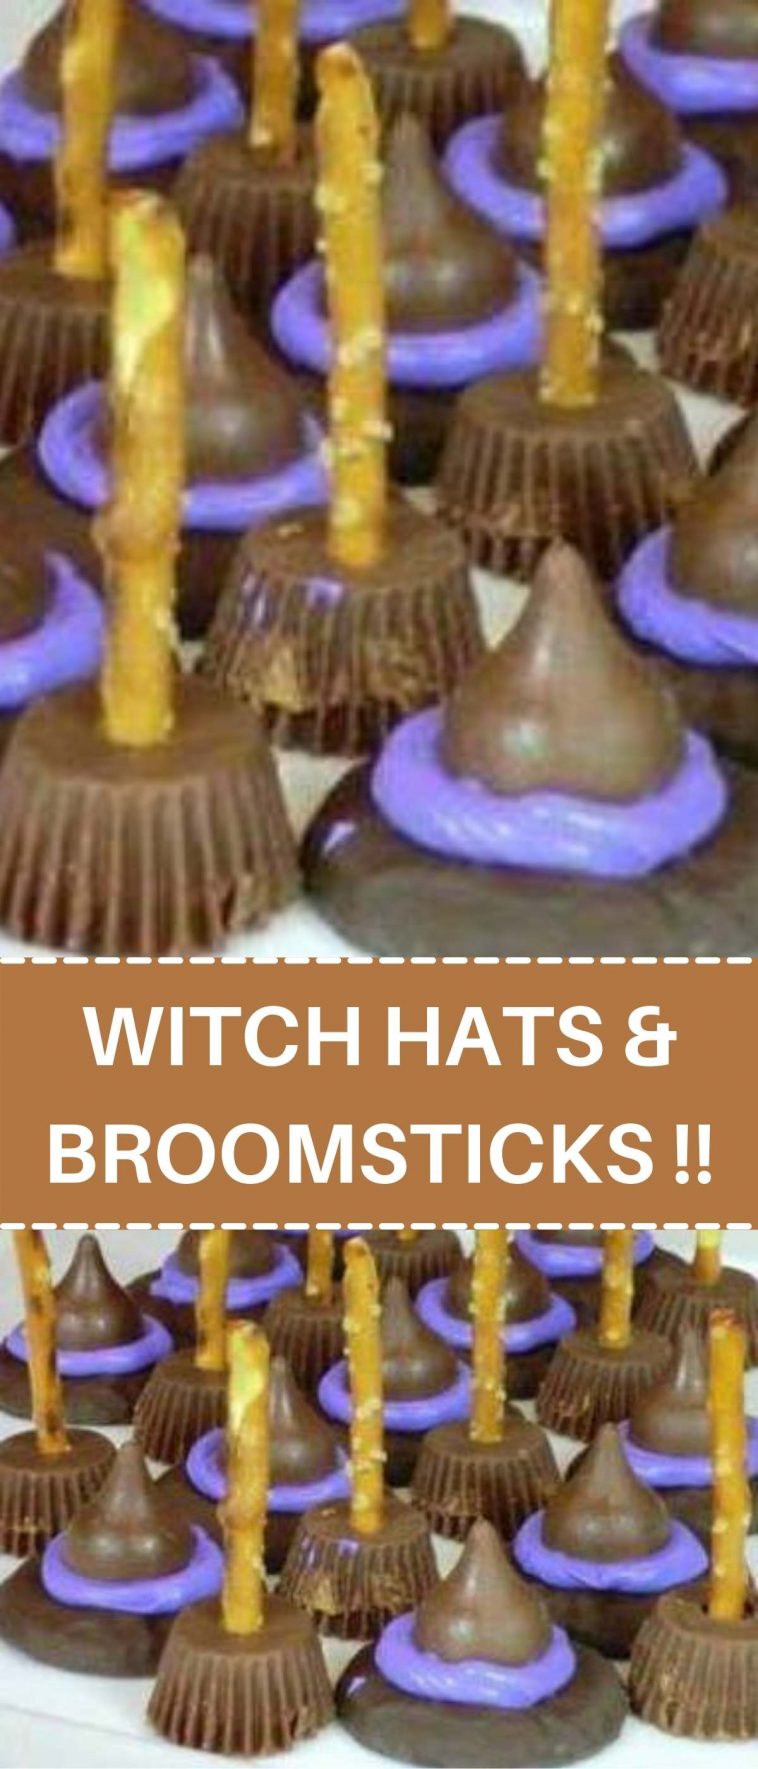 WITCH HATS & BROOMSTICKS !!